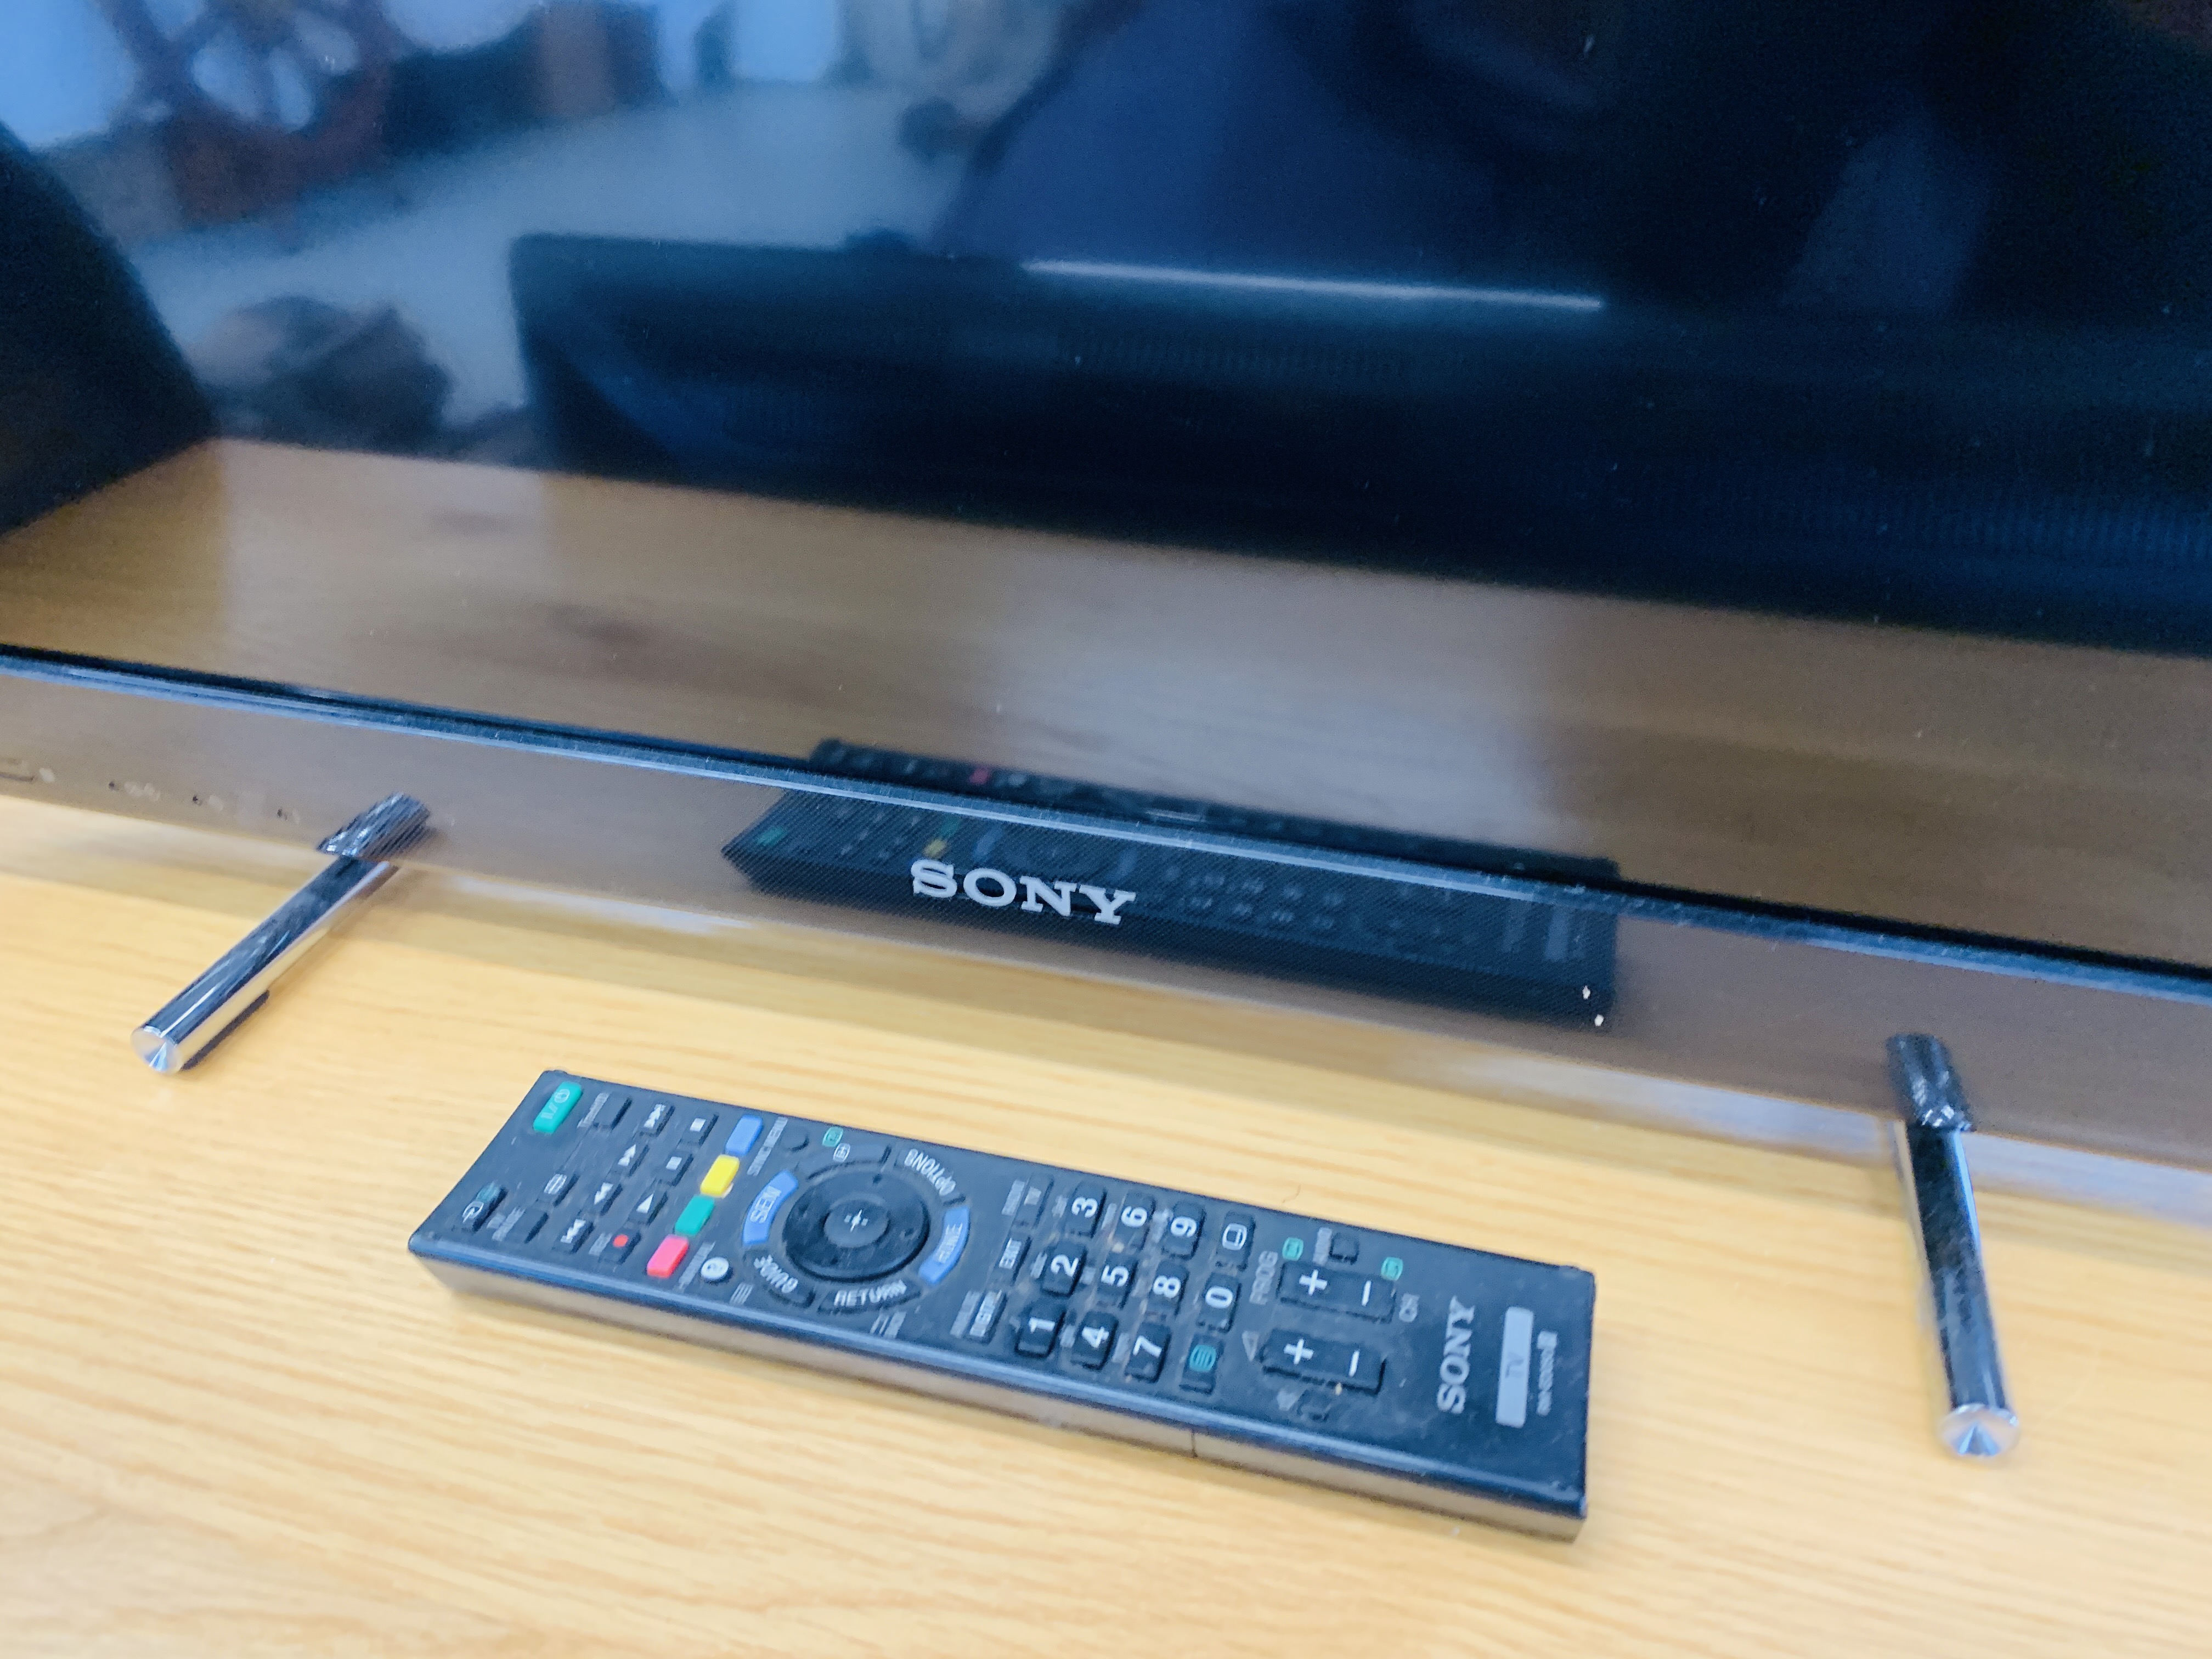 SONY LCD 26 INCH TV WITH REMOTE - SOLD AS SEEN - Image 2 of 4